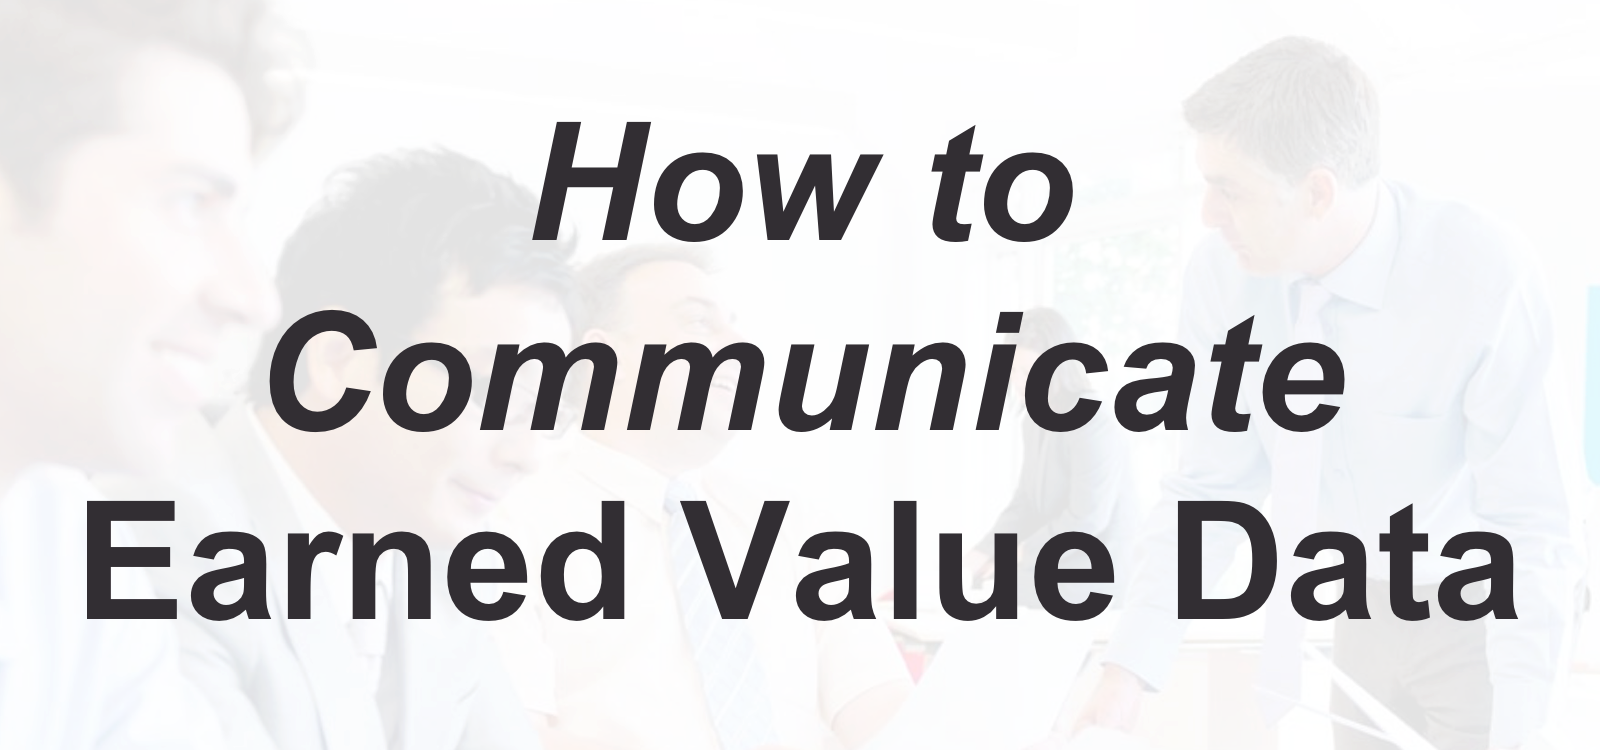 How to Communicate Earned Value Data